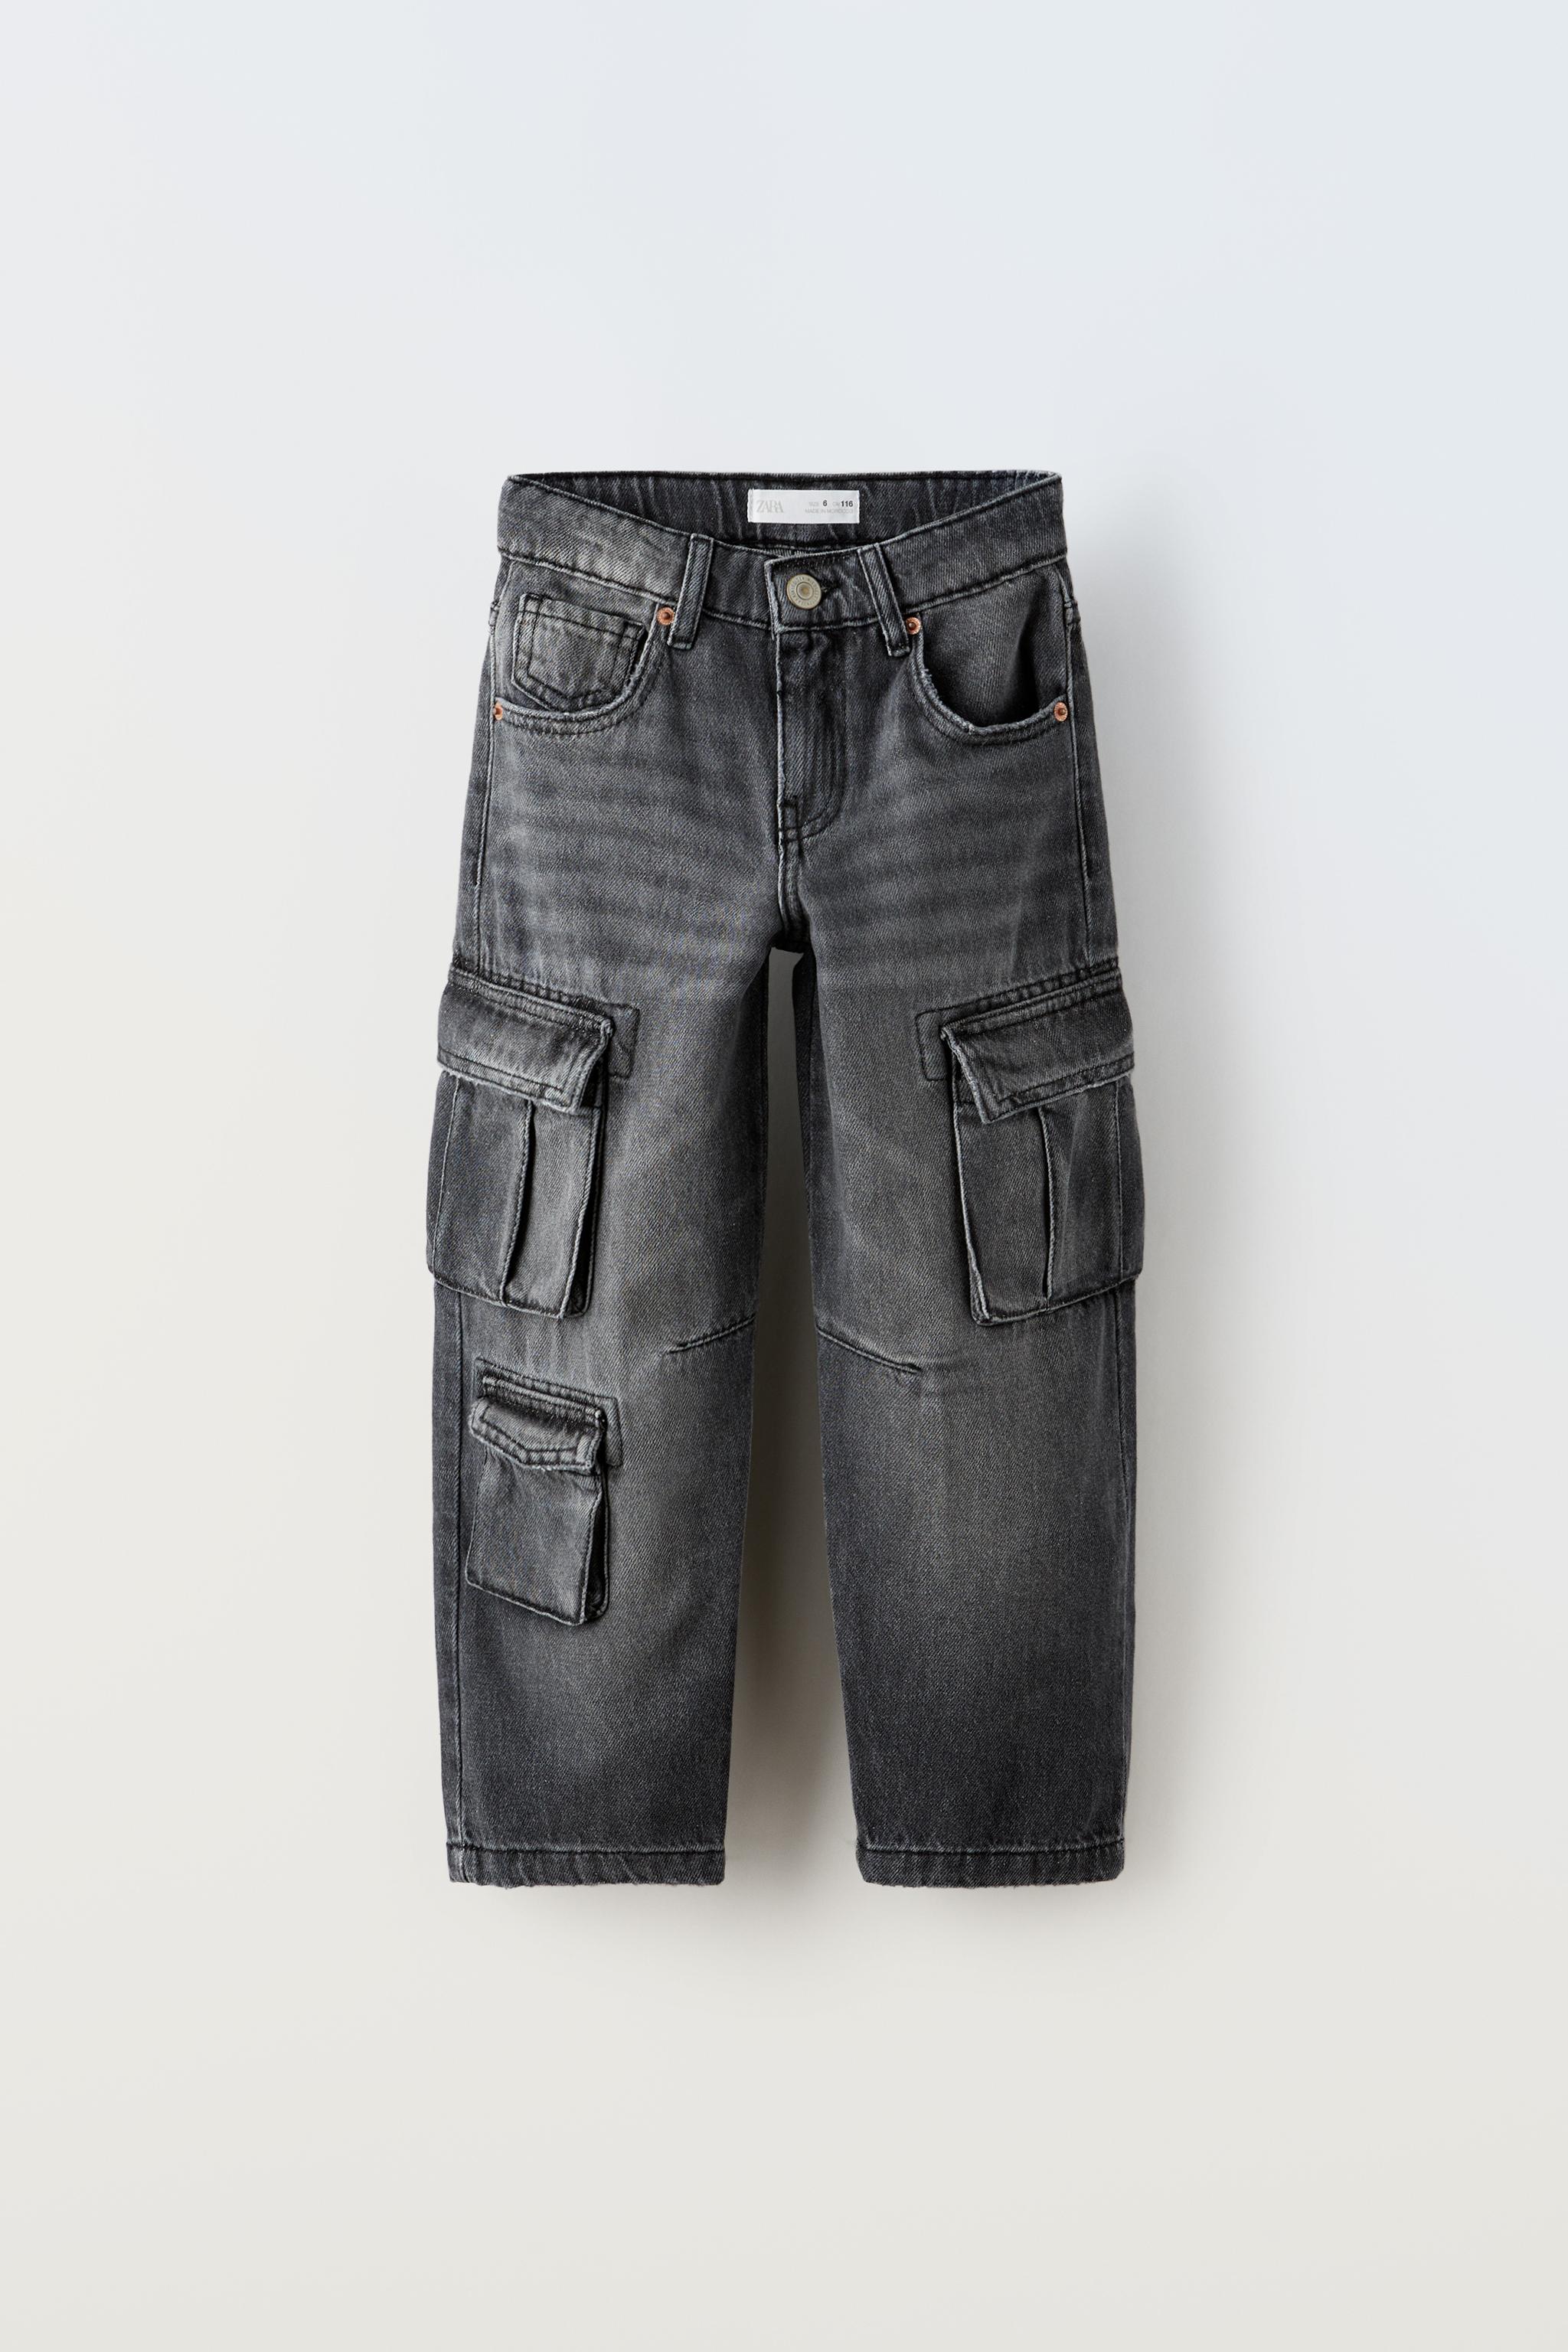 Off-White Co Multipocket cargo trousers - Grey